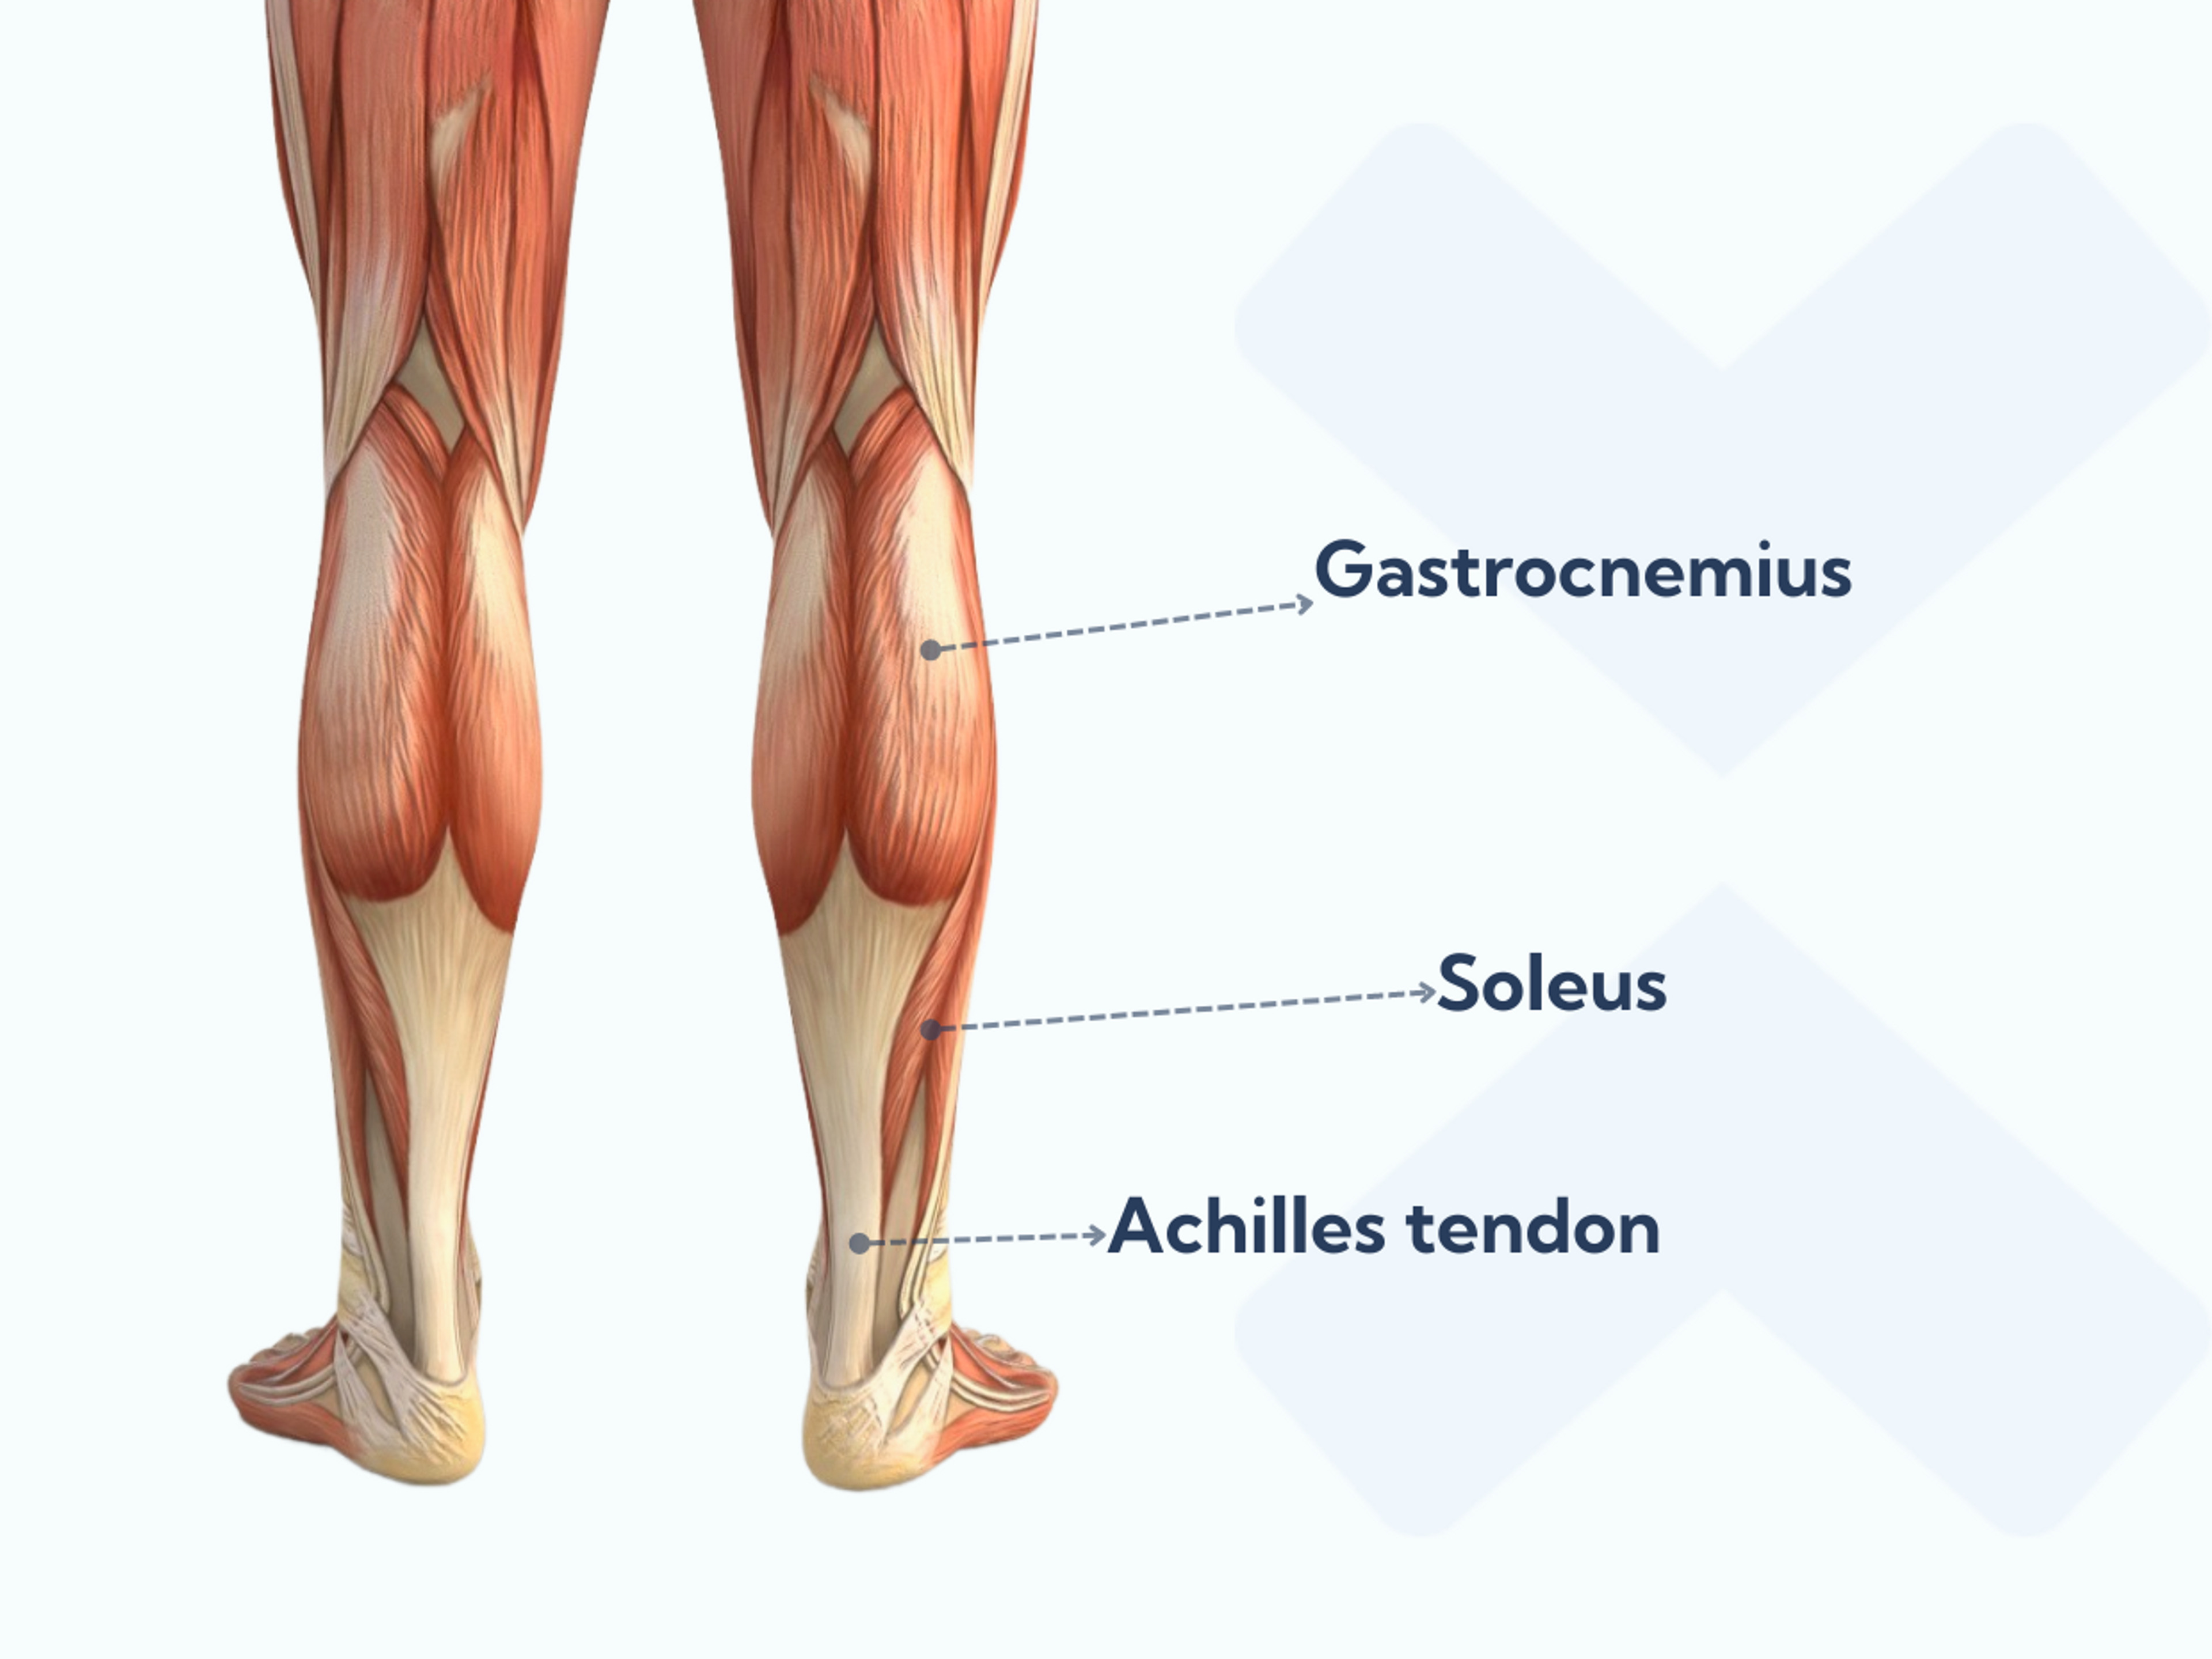 Anatomy of the calf muscles and Achilles tendon.